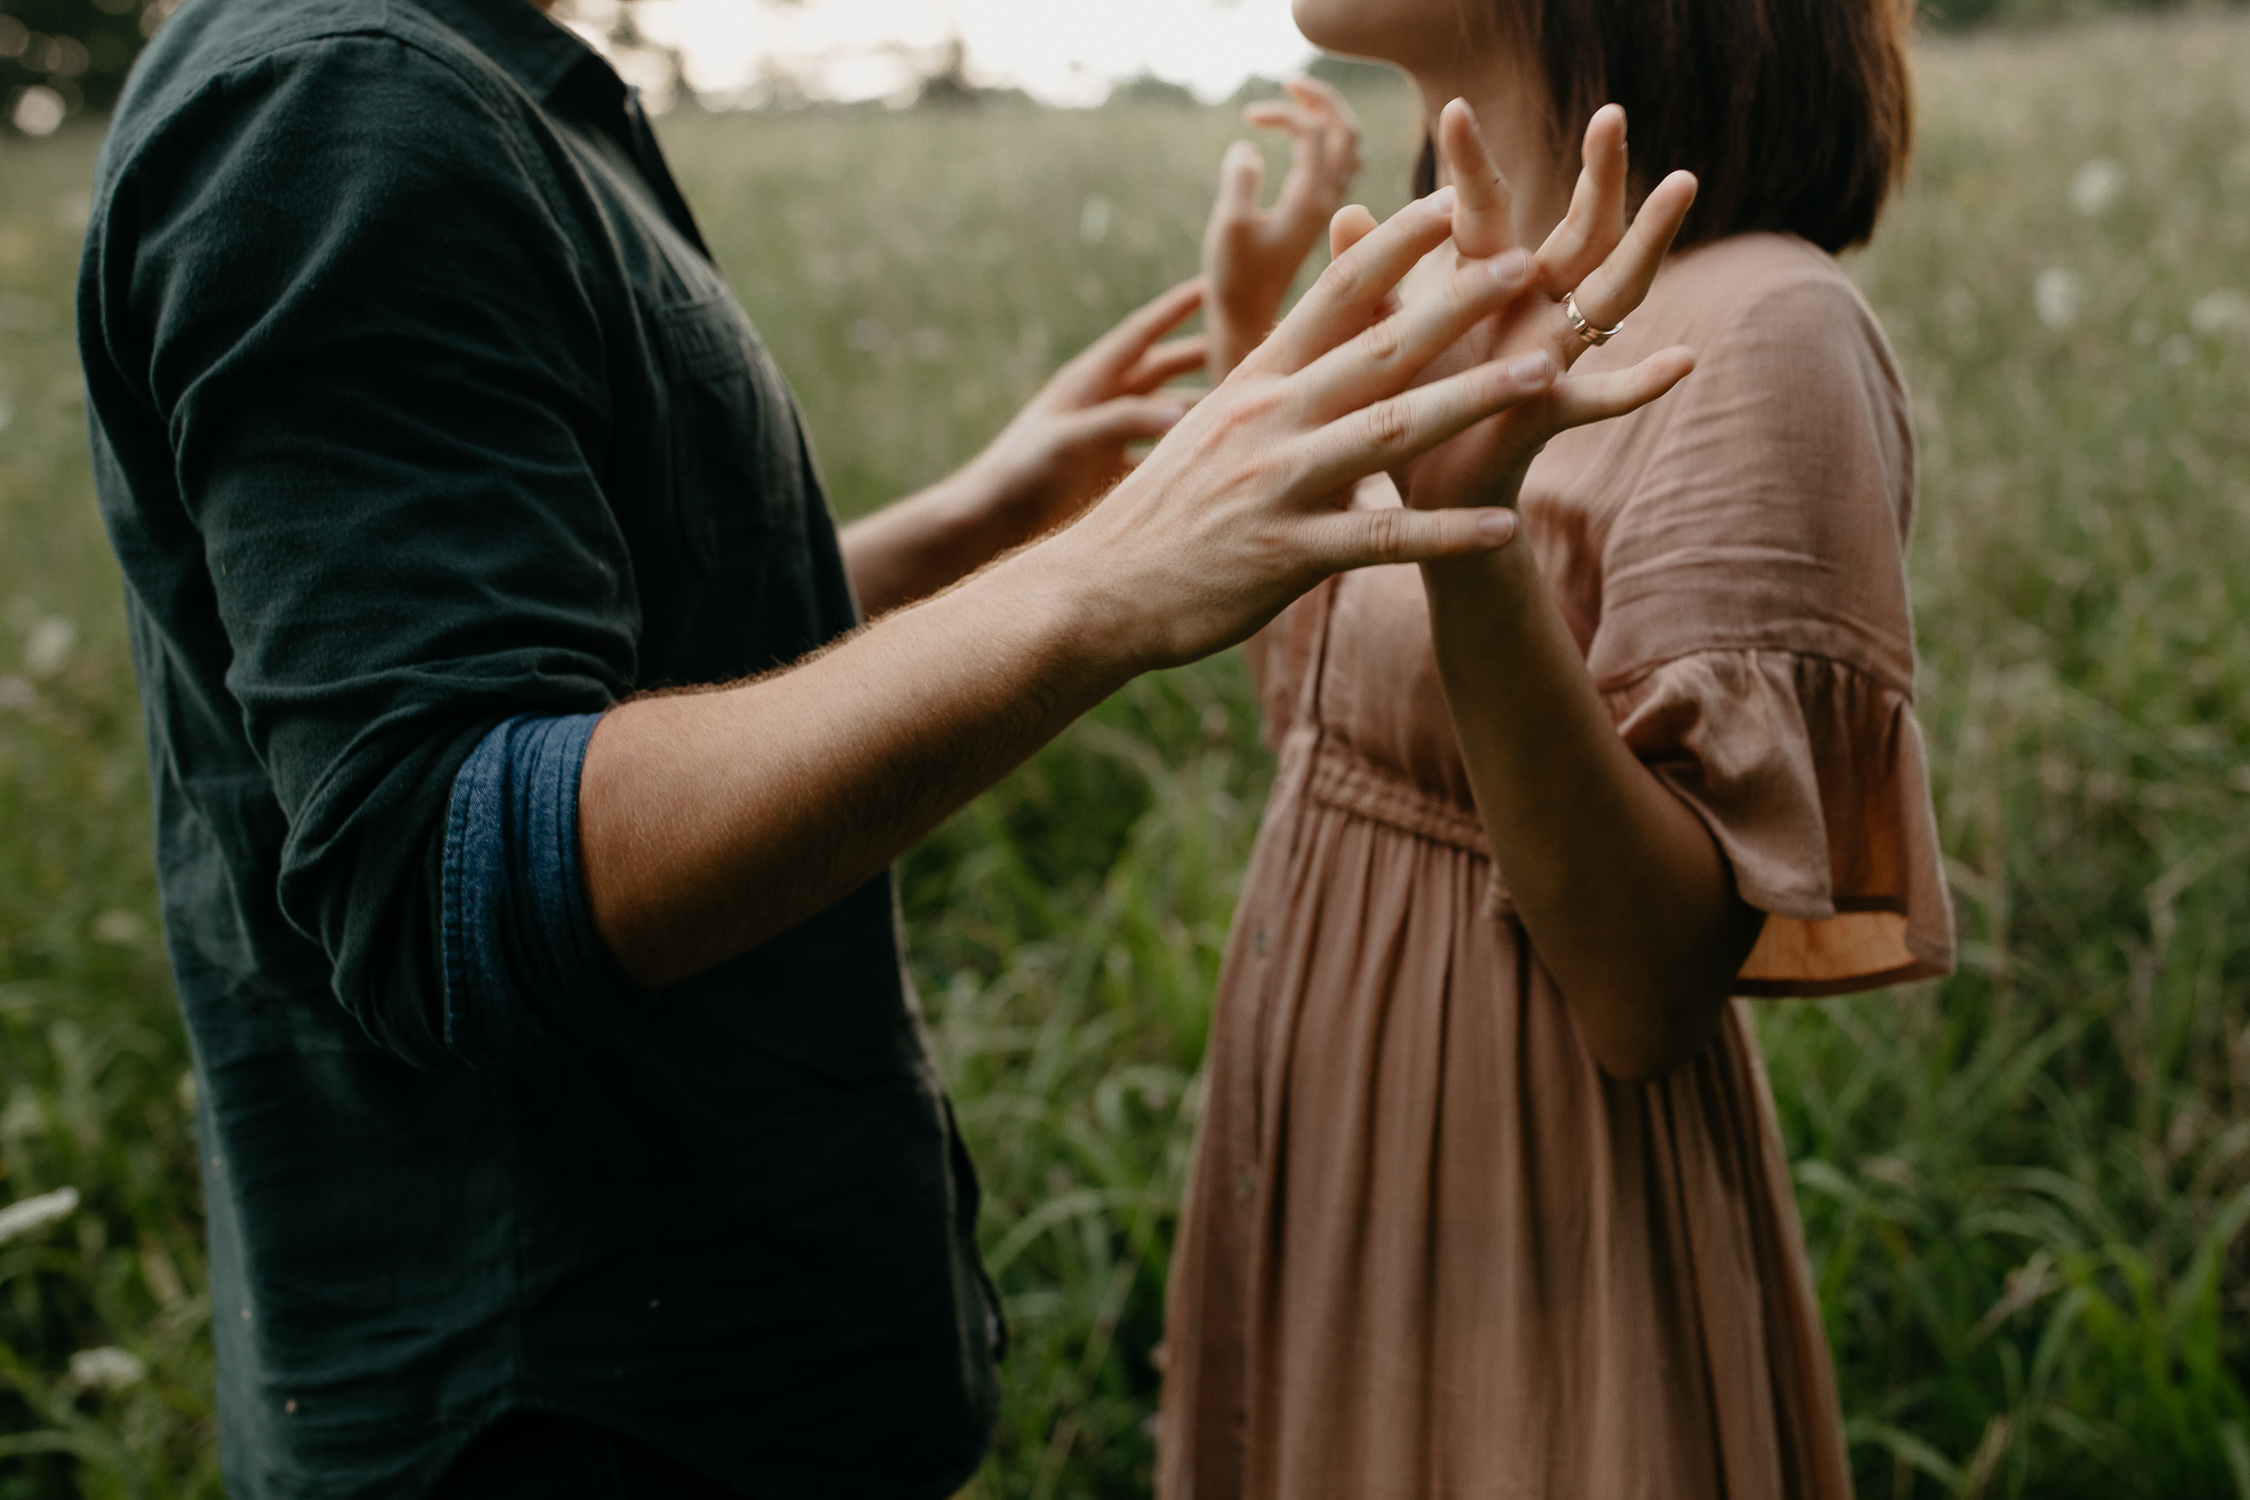 ariannamtorres and isaac engagement session at cades cove smoky mountains elopement-87.jpg